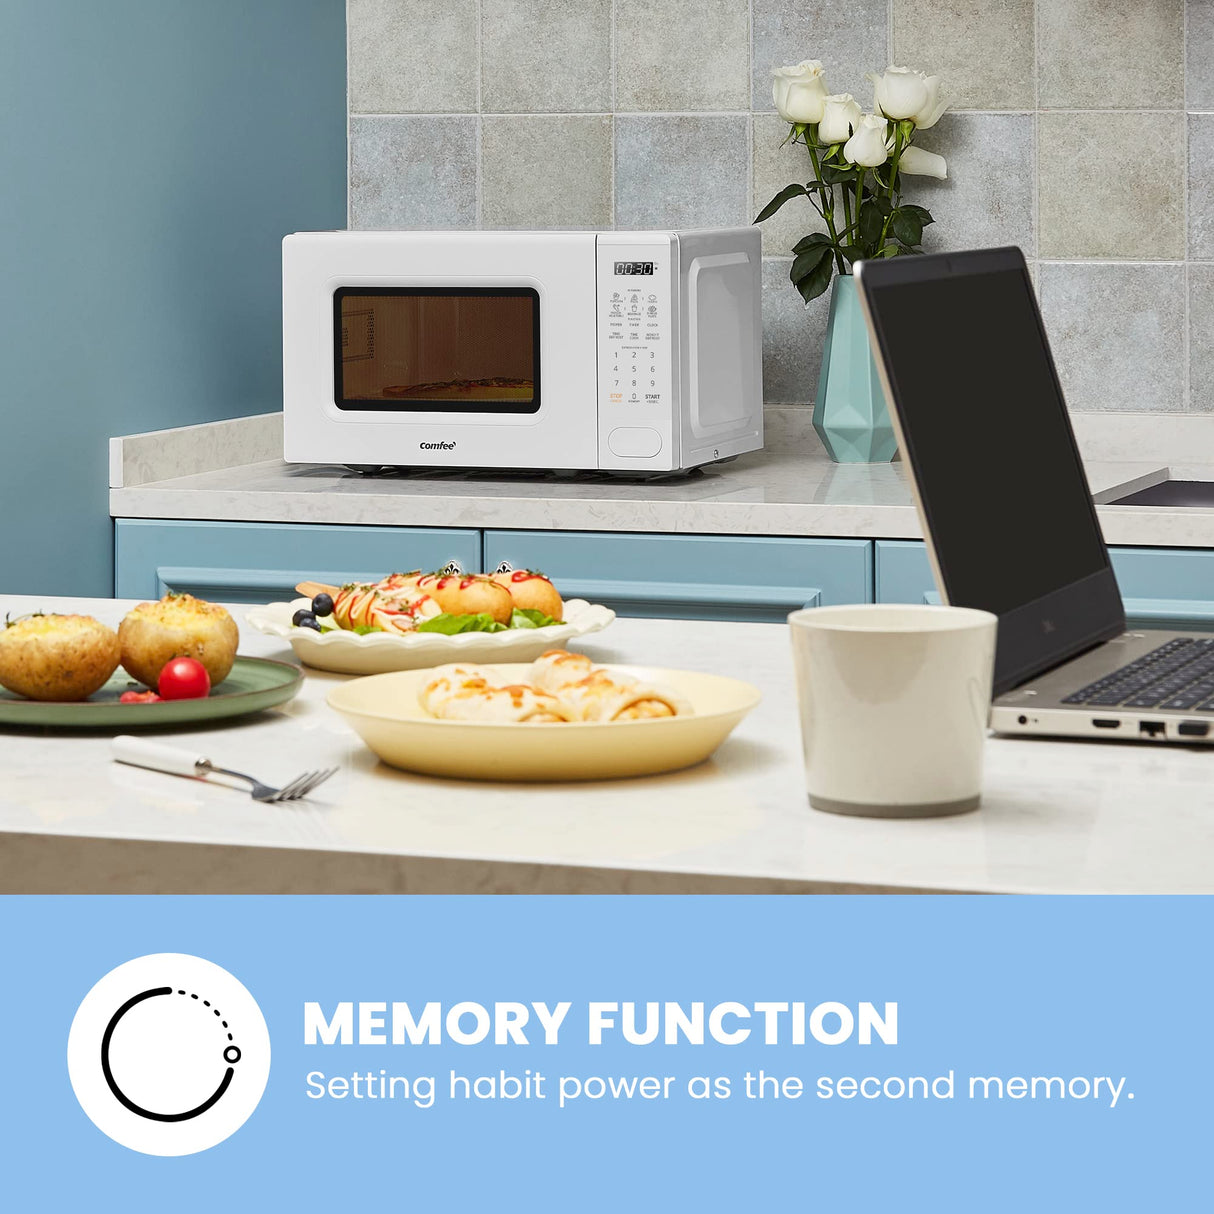 COMFEE CMO-C20M1WH Retro Microwave with 11 power levels, Fast Multi-stage Cooking, Turntable Reset Function Kitchen Timer, Speedy Cooking， Weight/Time Defrost, Memory function, Children Lock, 700W